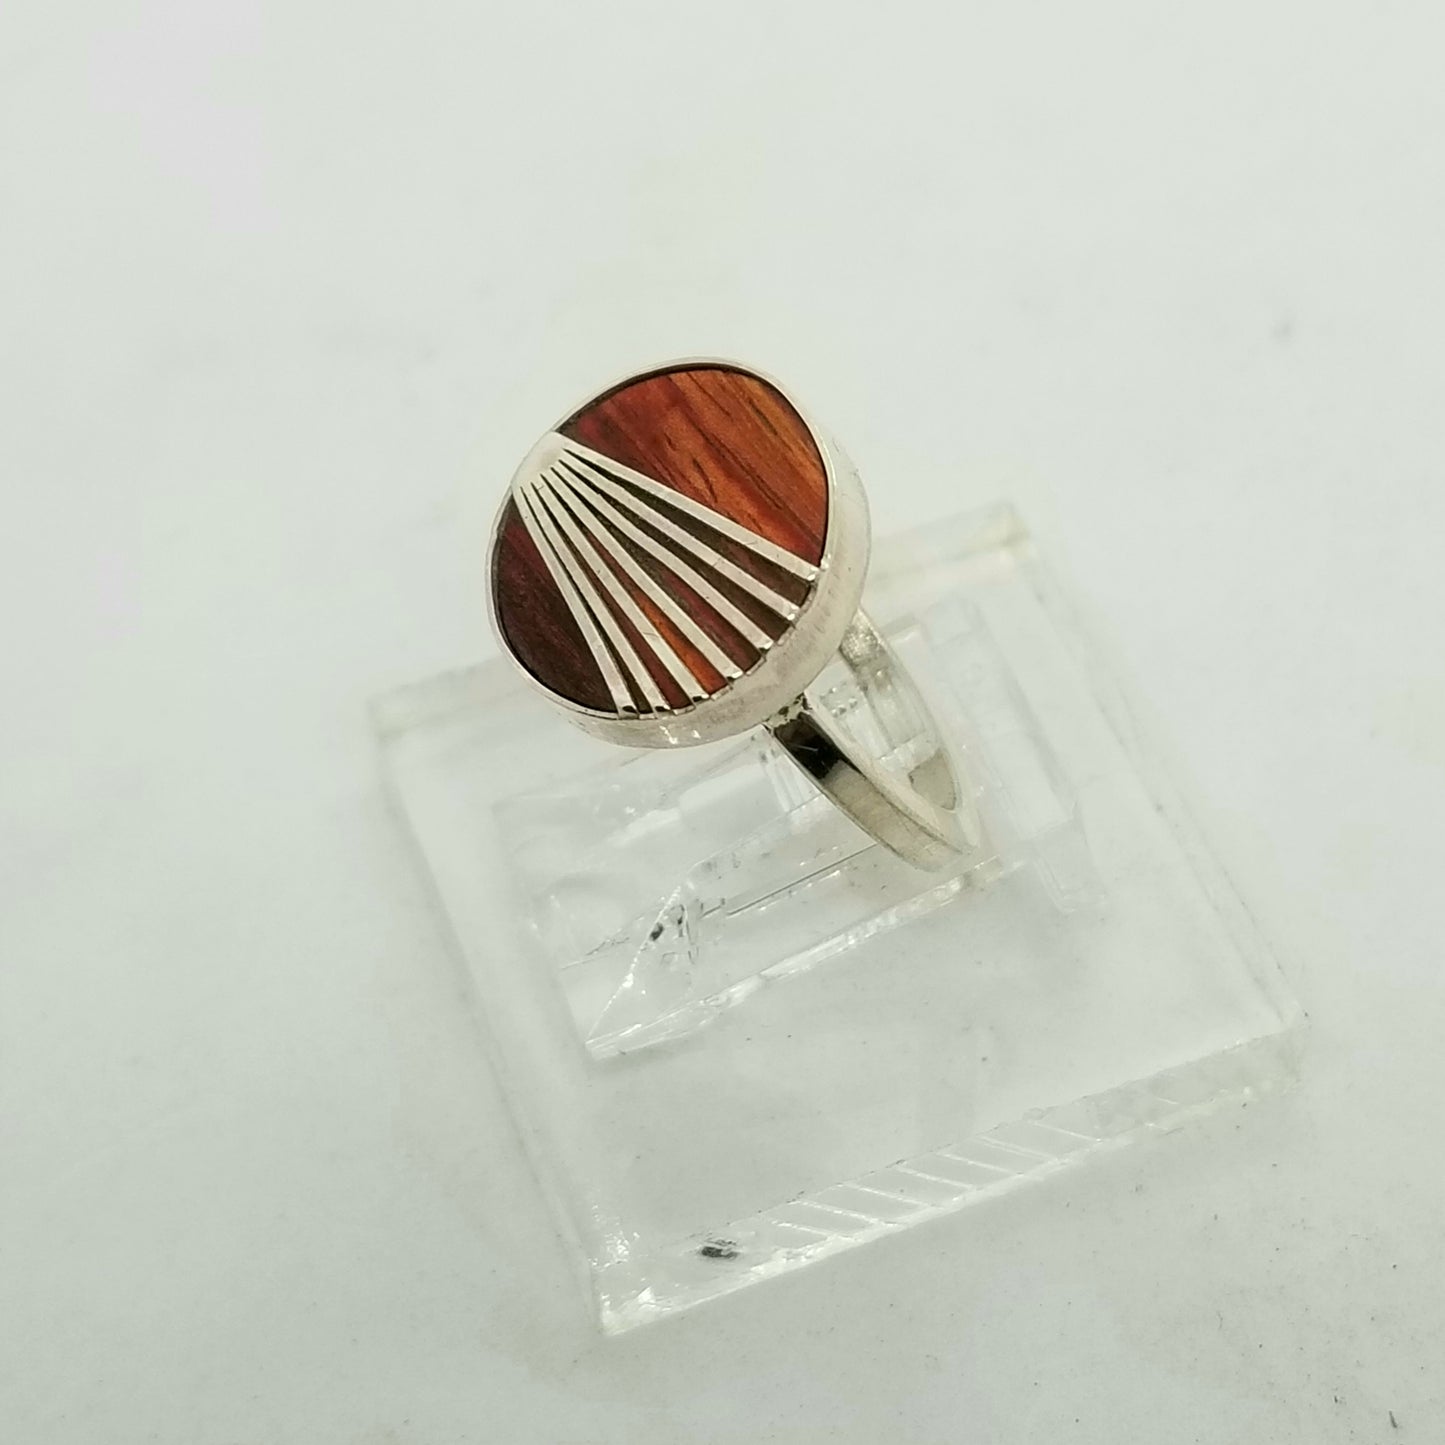 Sunburst - Silver and Wood Ring